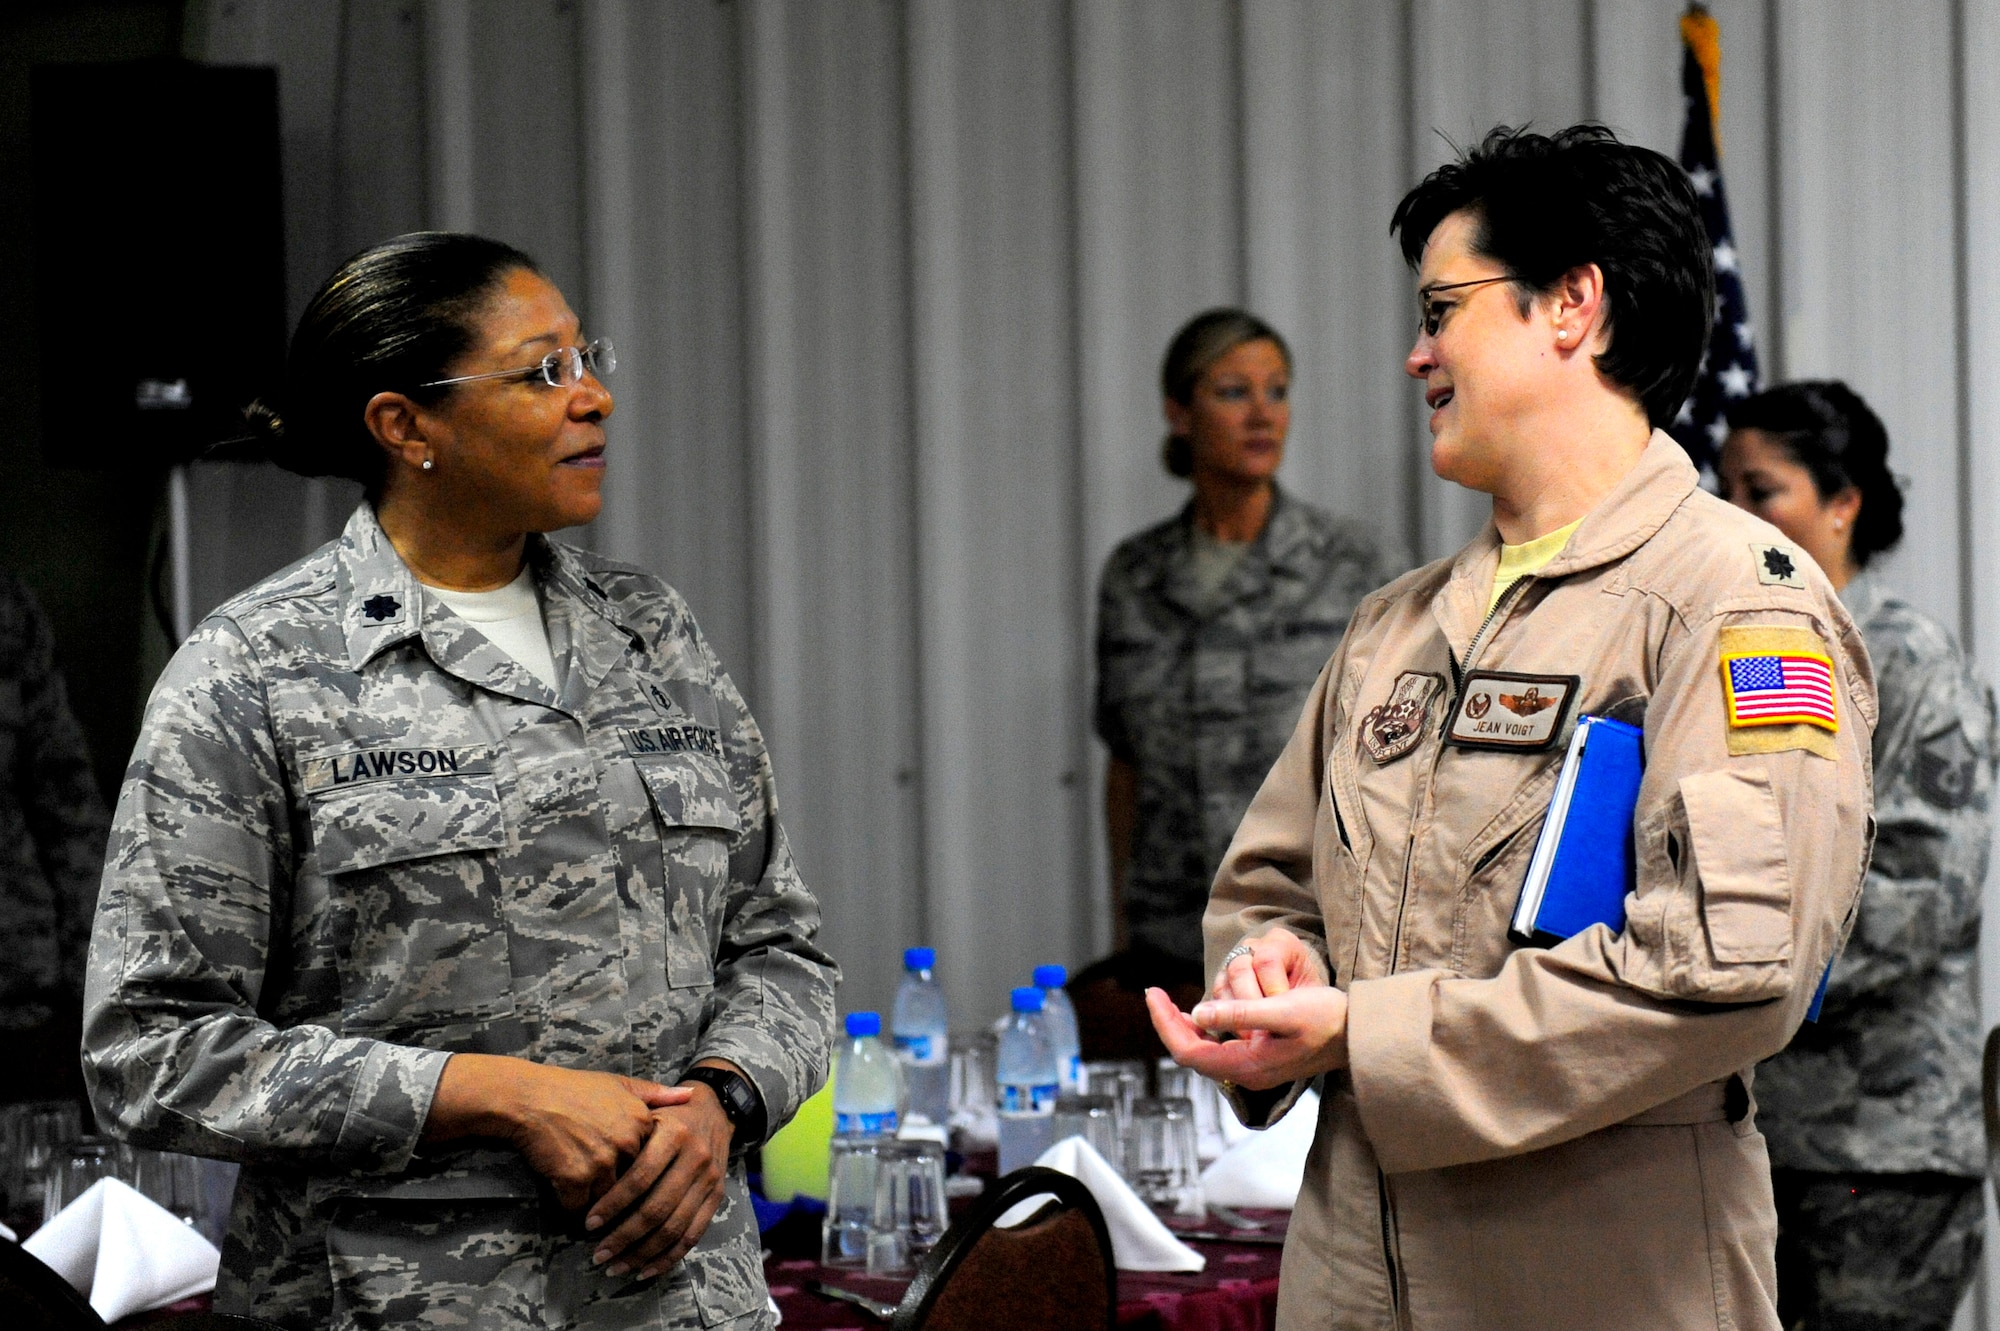 Lt. Col. Theresa Lawson, 380 Expeditionary Medical Group Mental Health chief and Lt. Col. Jeanette Voigt, 908 Expeditionary Air Refueling Squadron commander shared their experiences as panel members during the 380 AEW Women's History Month symposium luncheon here. Colonel Lawson is deployed from Sheppard AFB, Texas and Colonel Voigt is deployed from McGuire AFB, N.J. (U.S. Air Force photo by Capt. Jennifer Pearson) (Released)